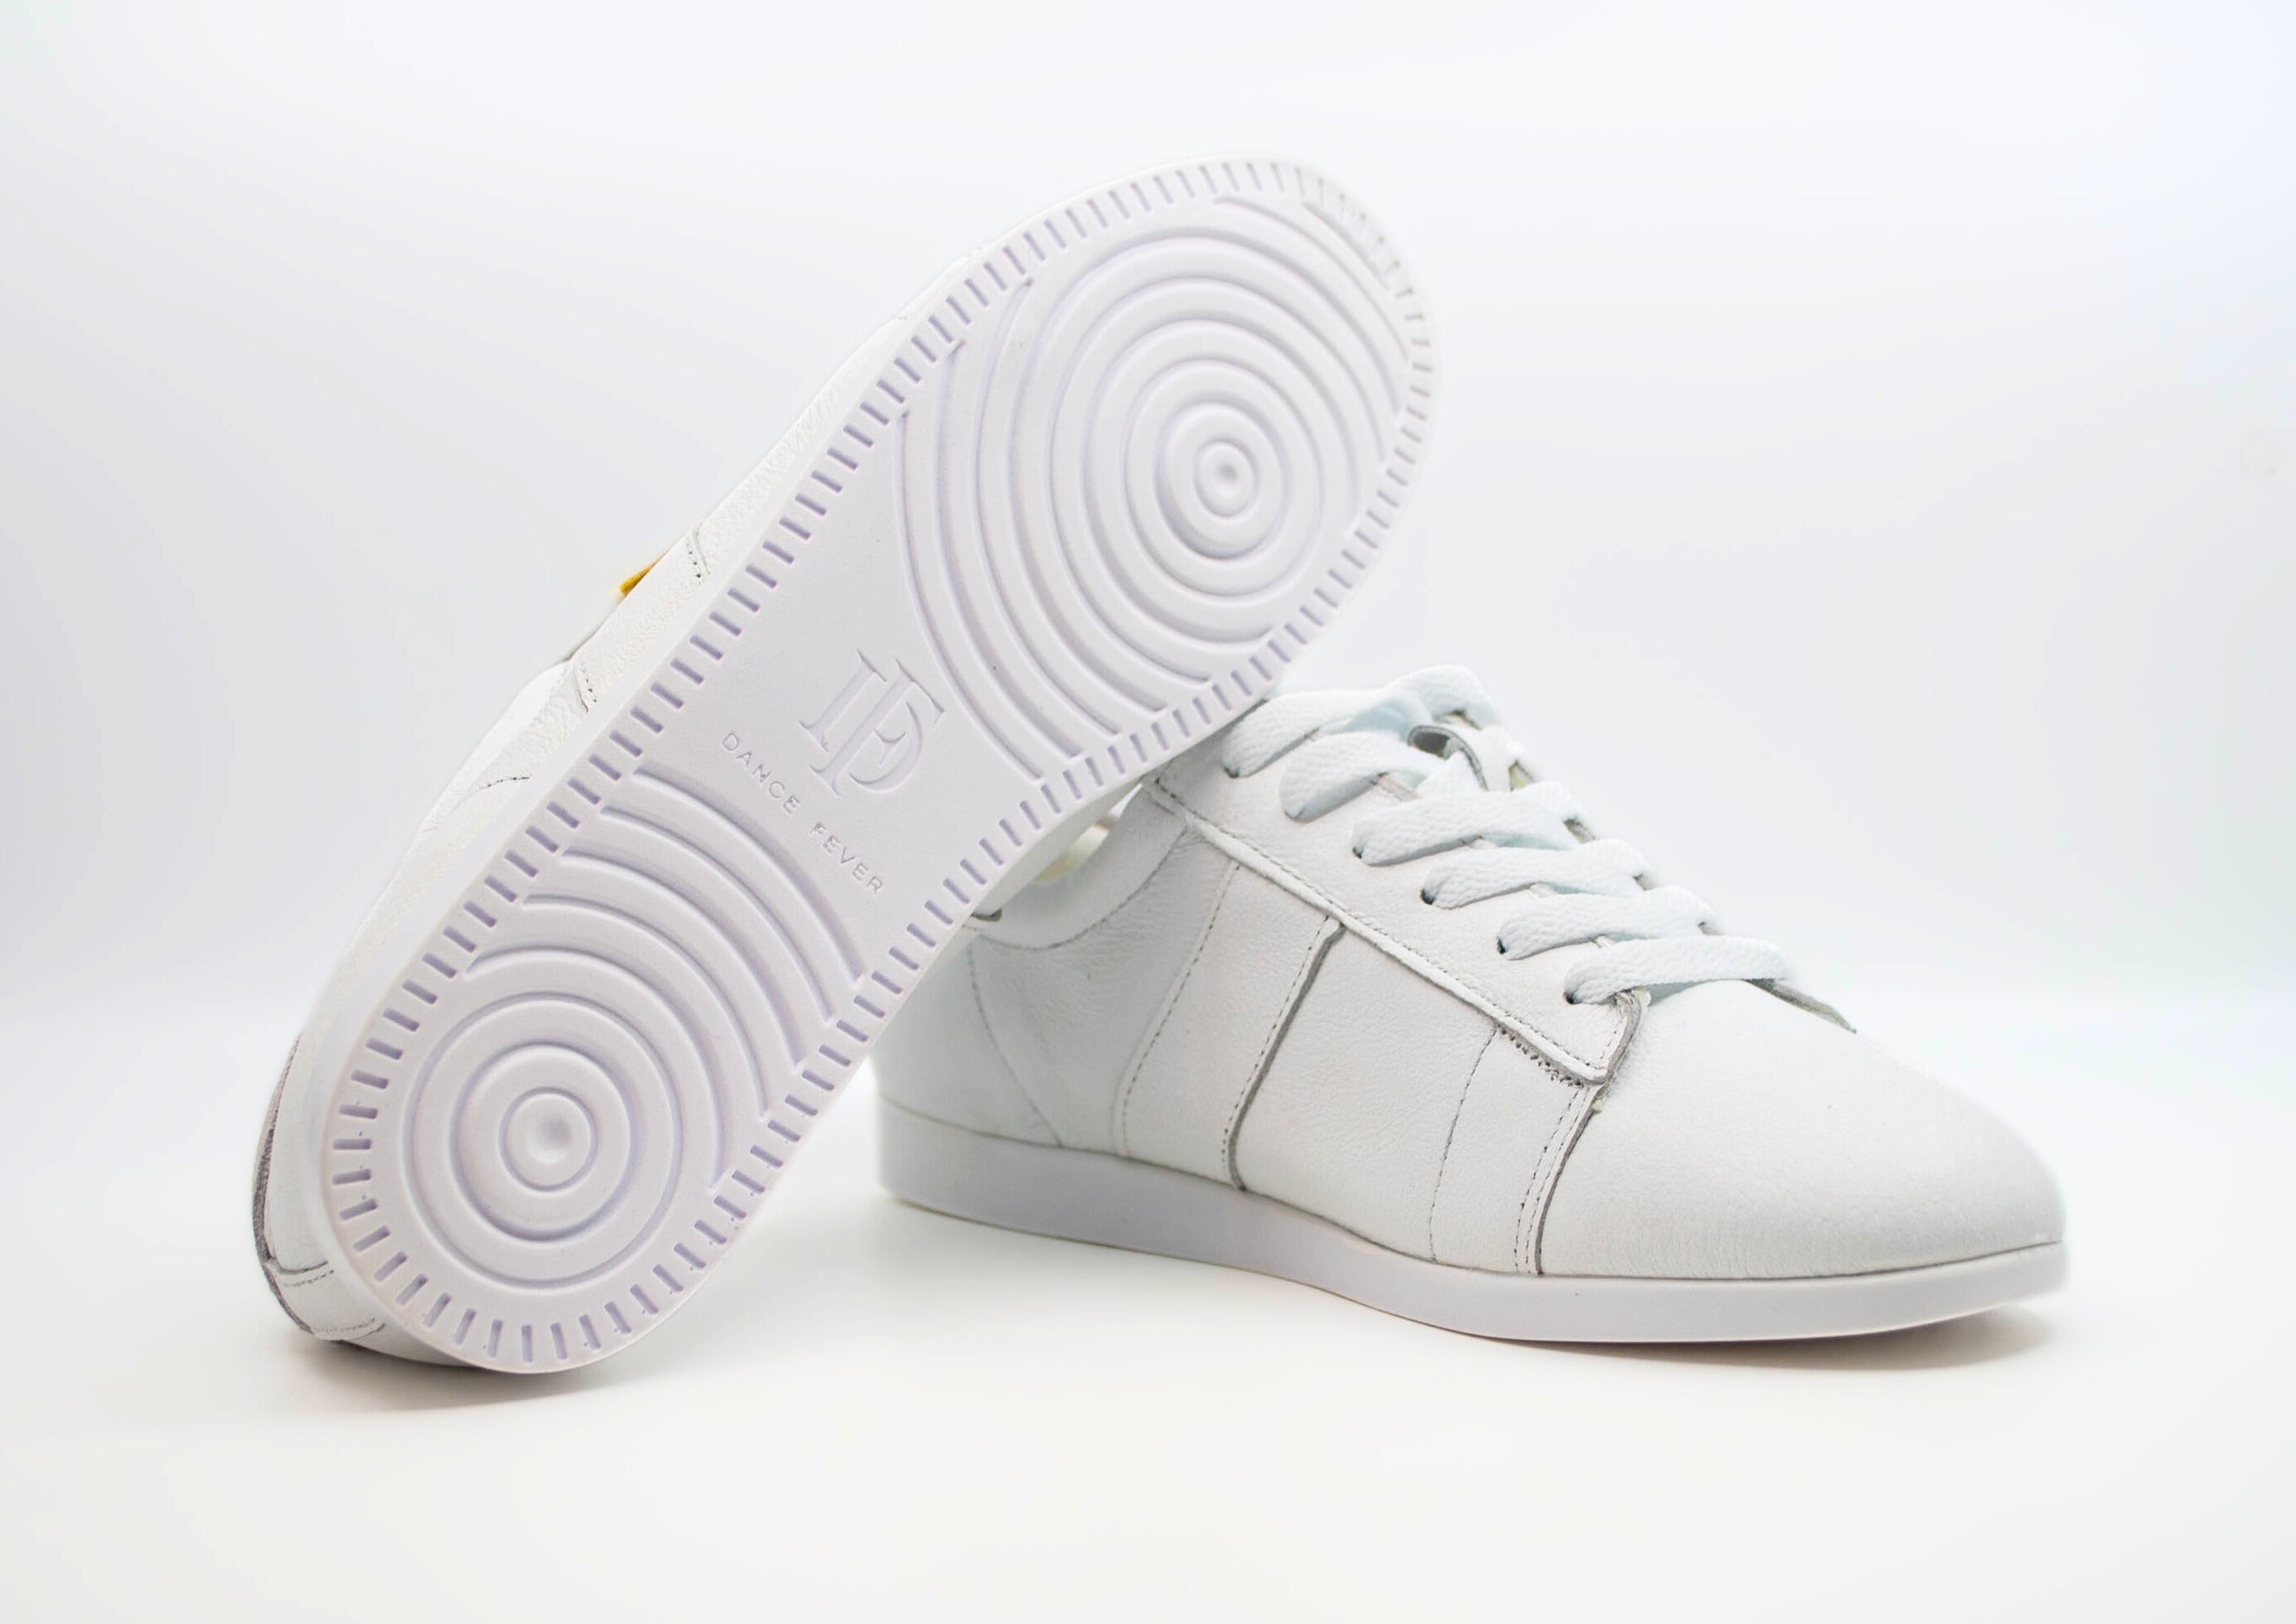 Ladies White Leather Dance Sneakers with Dual Pivot Point, Spin Spots & Flexible, Smooth Sole - (2306W) - Rockabilly Australia Pty Ltd